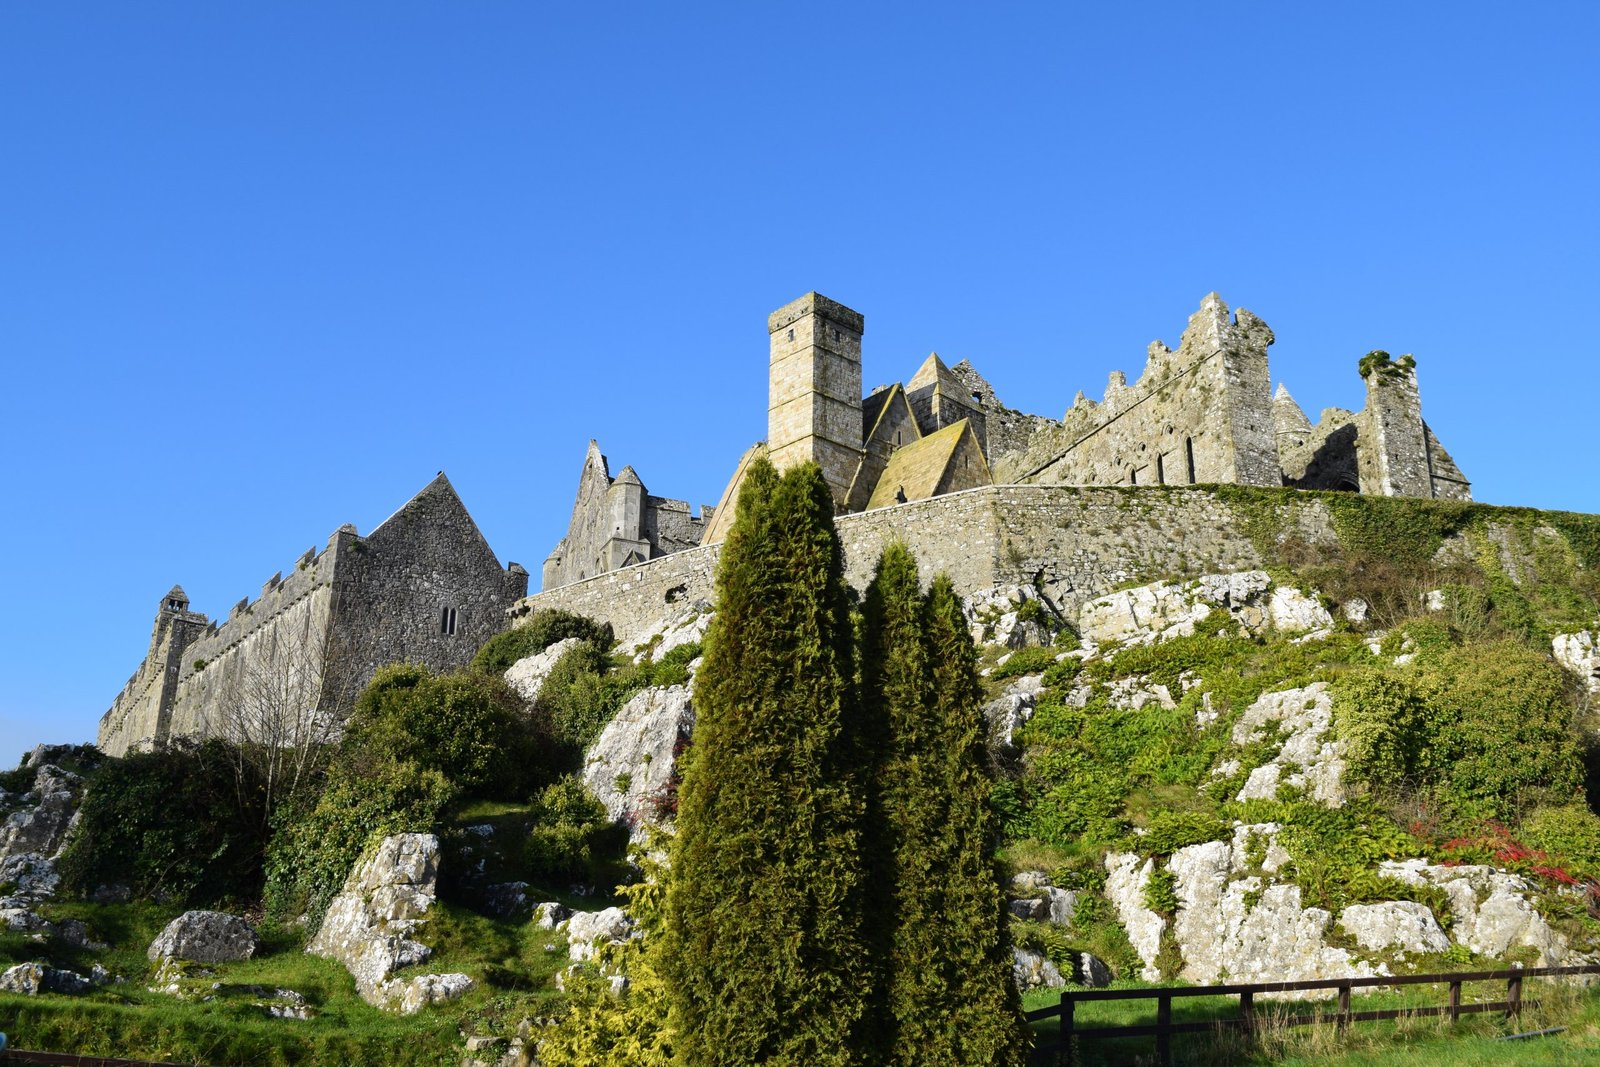 The Rock of Cashel in Ireland is historic and a must see, https://ouritalianjourney.com/rock-of-cashel-castle-ireland